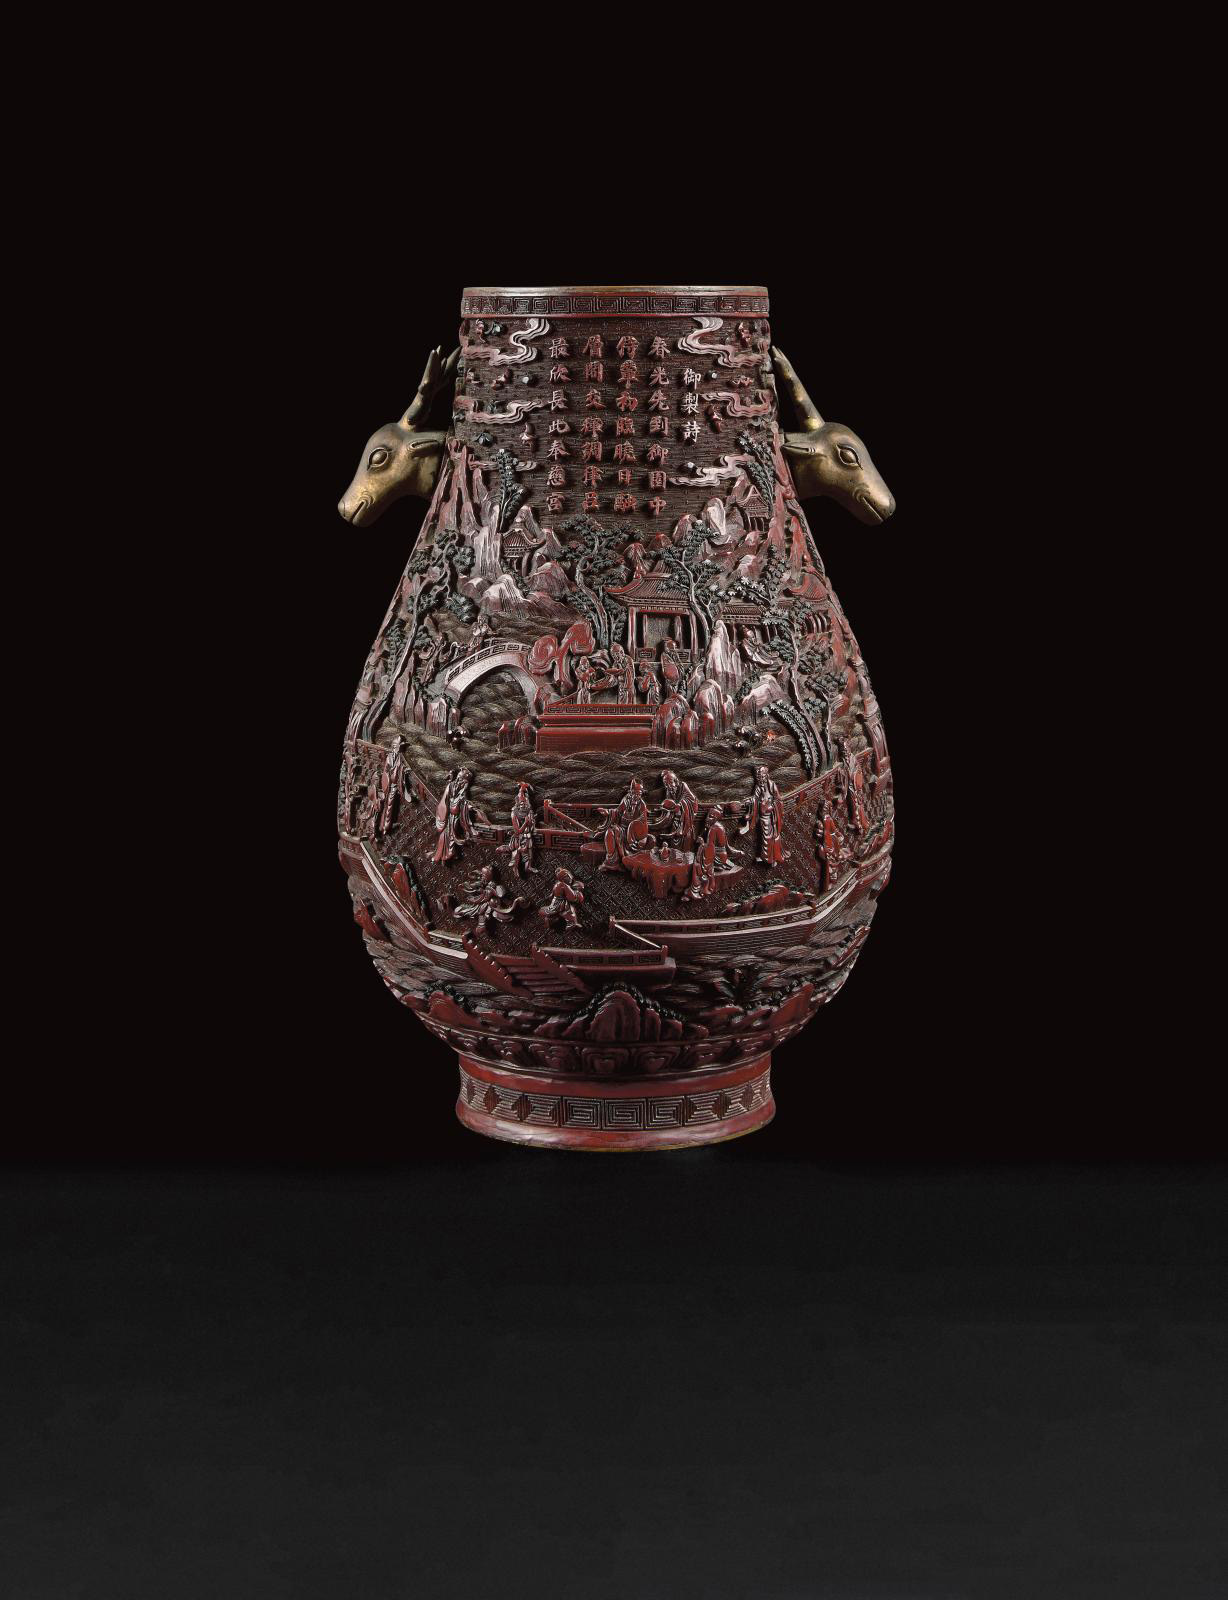 China, 19th century. Hu form vase in red and black lacquer, on the back the apocryphal Qianlong mark, h. 38.5 cm/15.1 in.
Estimate : €3 0